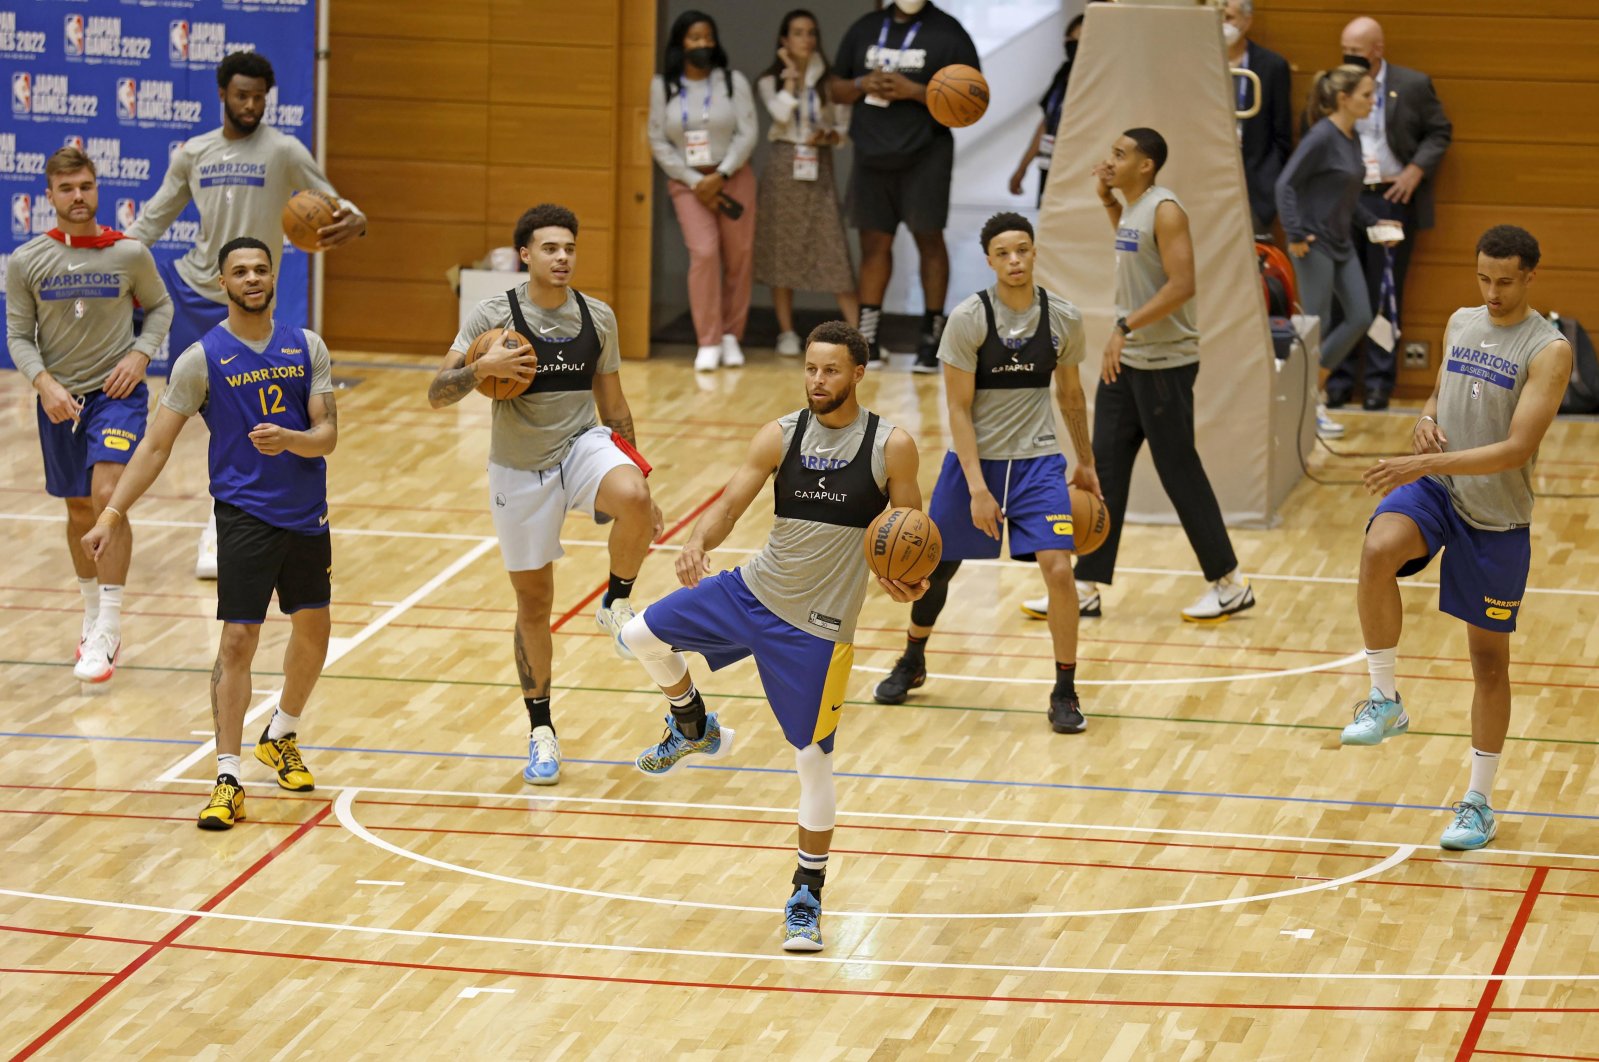 Washington Wizards players including Stephen Curry, center, work out ahead of the NBA preseason games. Japan, Tokyo, Thursday, Sept. 29, 2022,  (AP Photo)